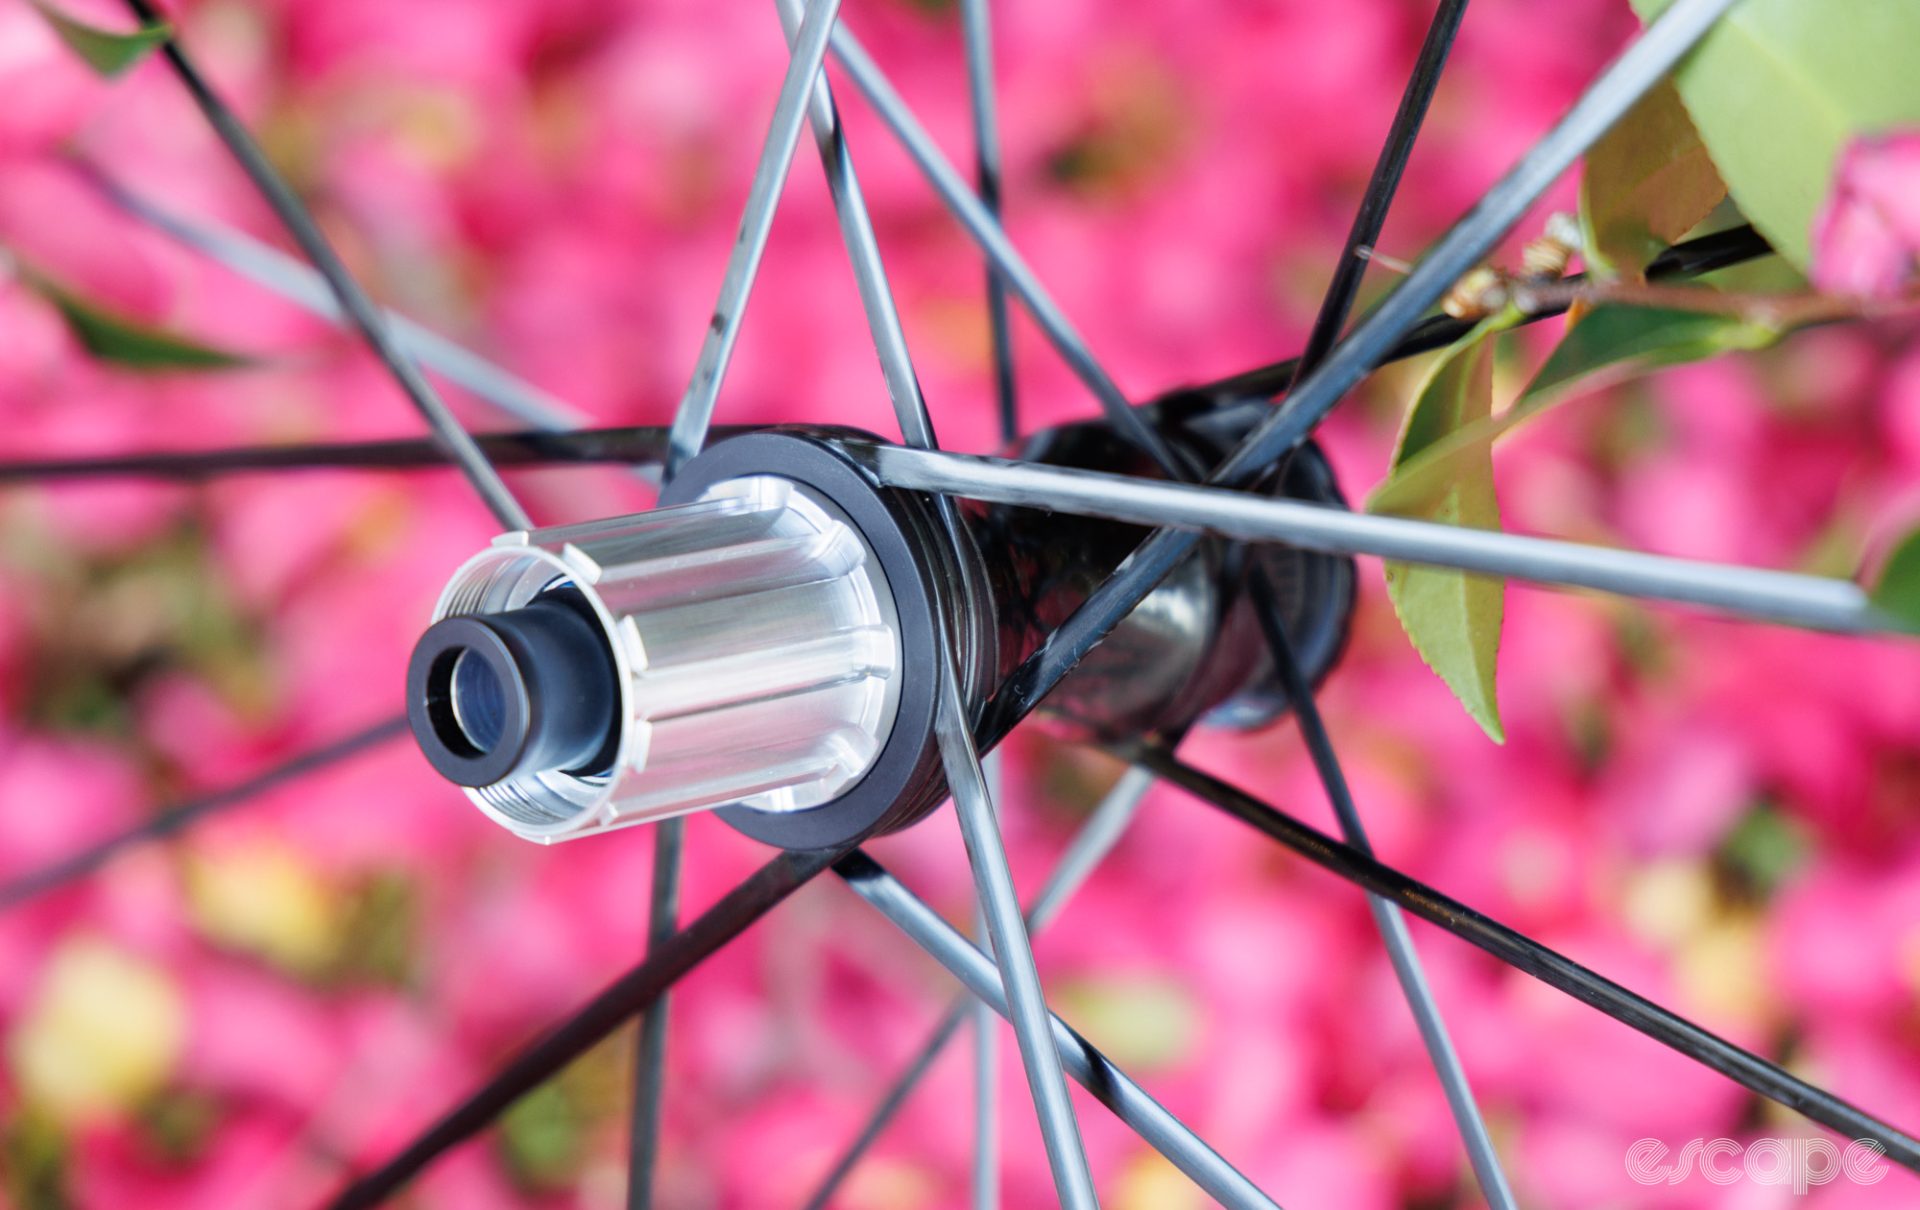 A closeup of the drive side of the Partington MKII rear hub.